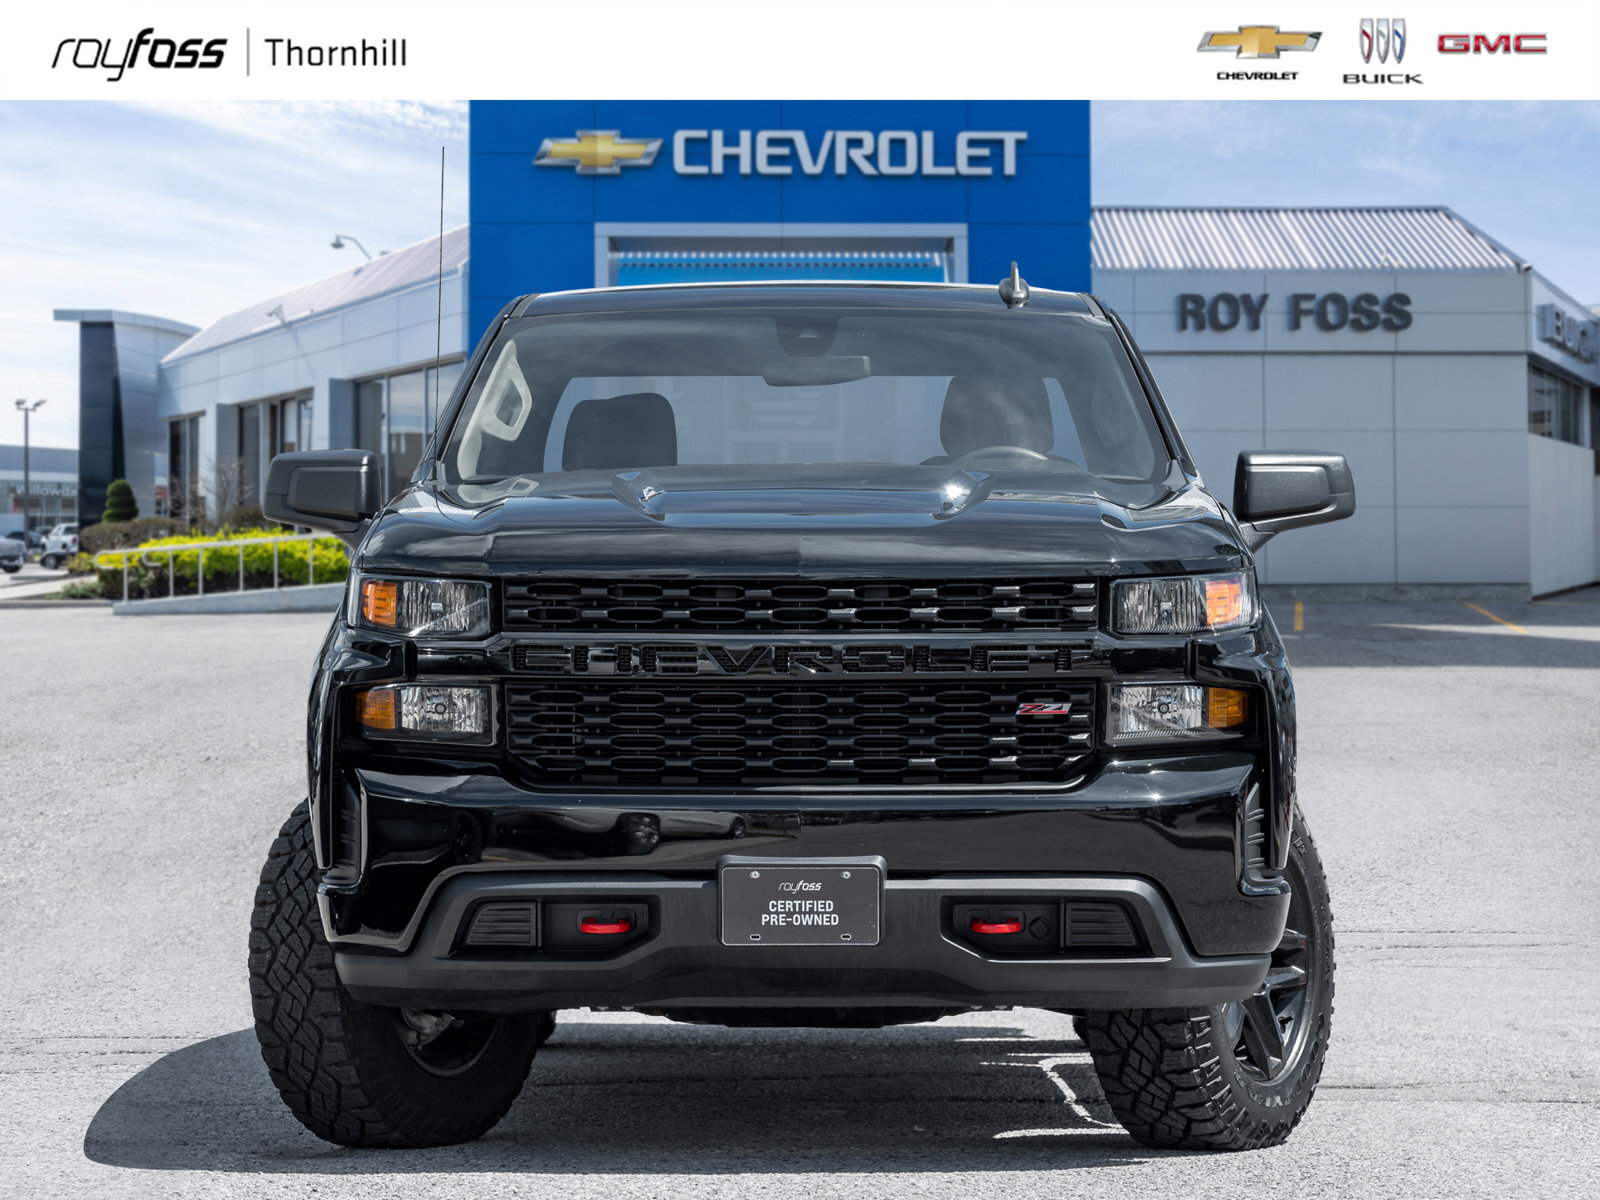 2022 Chevrolet Silverado 1500 LTD RATES STARTING FROM 4.99%+1 OWNER+CPO CERTIFIED